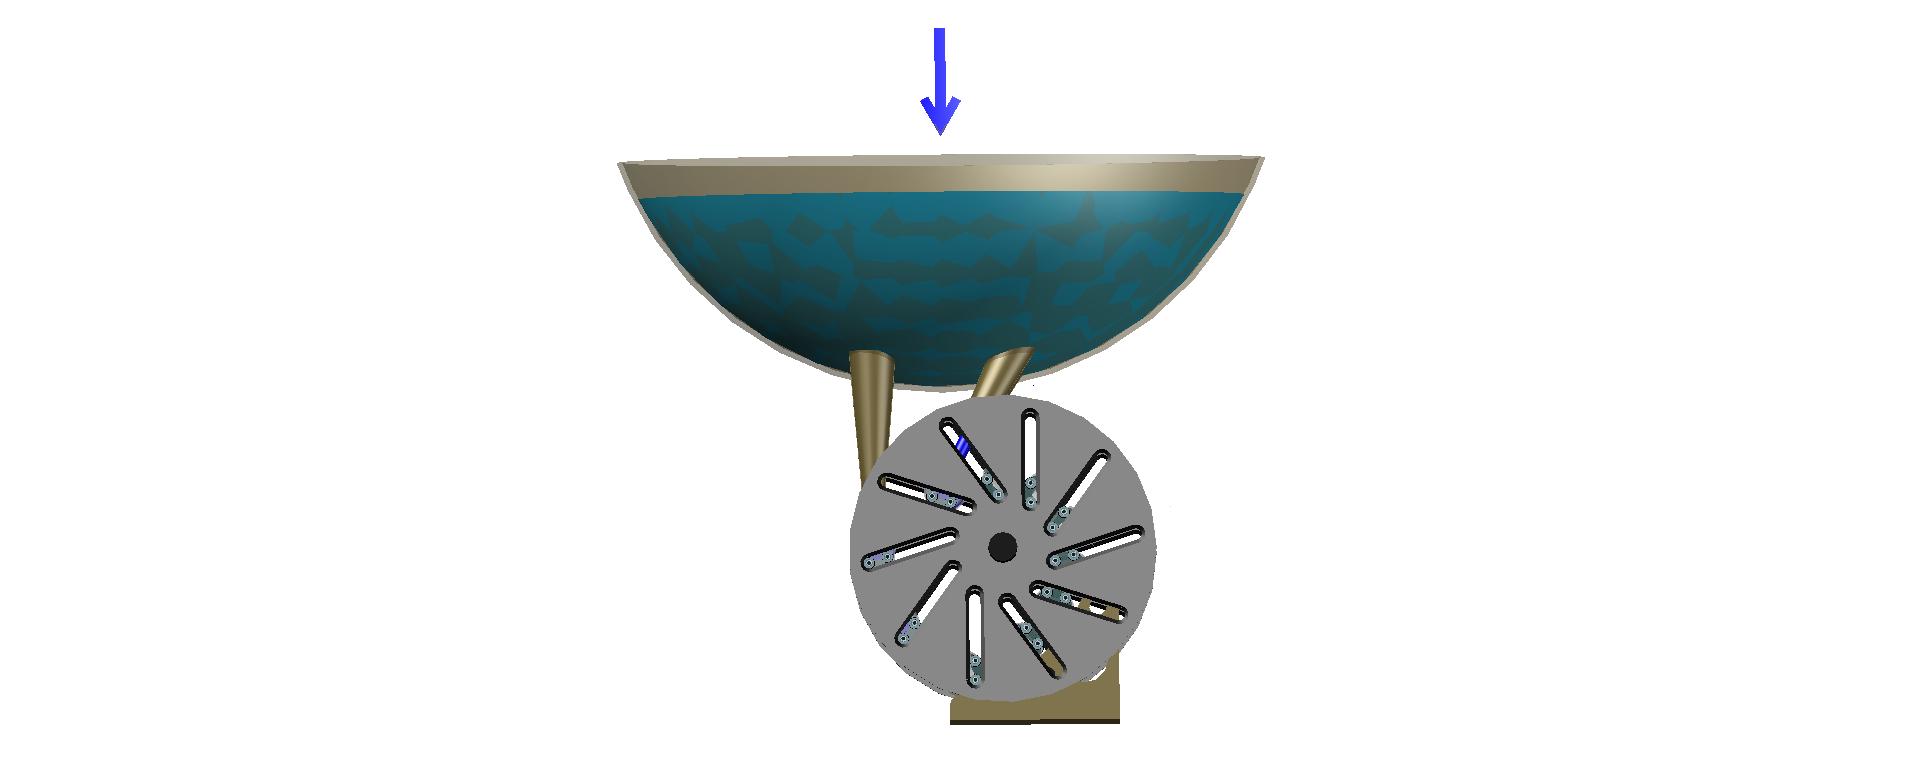 The appearance variant of design motor rotor, equipped by hollow movable blades, which is under the impact of the water pressure coming from the two nozzles.